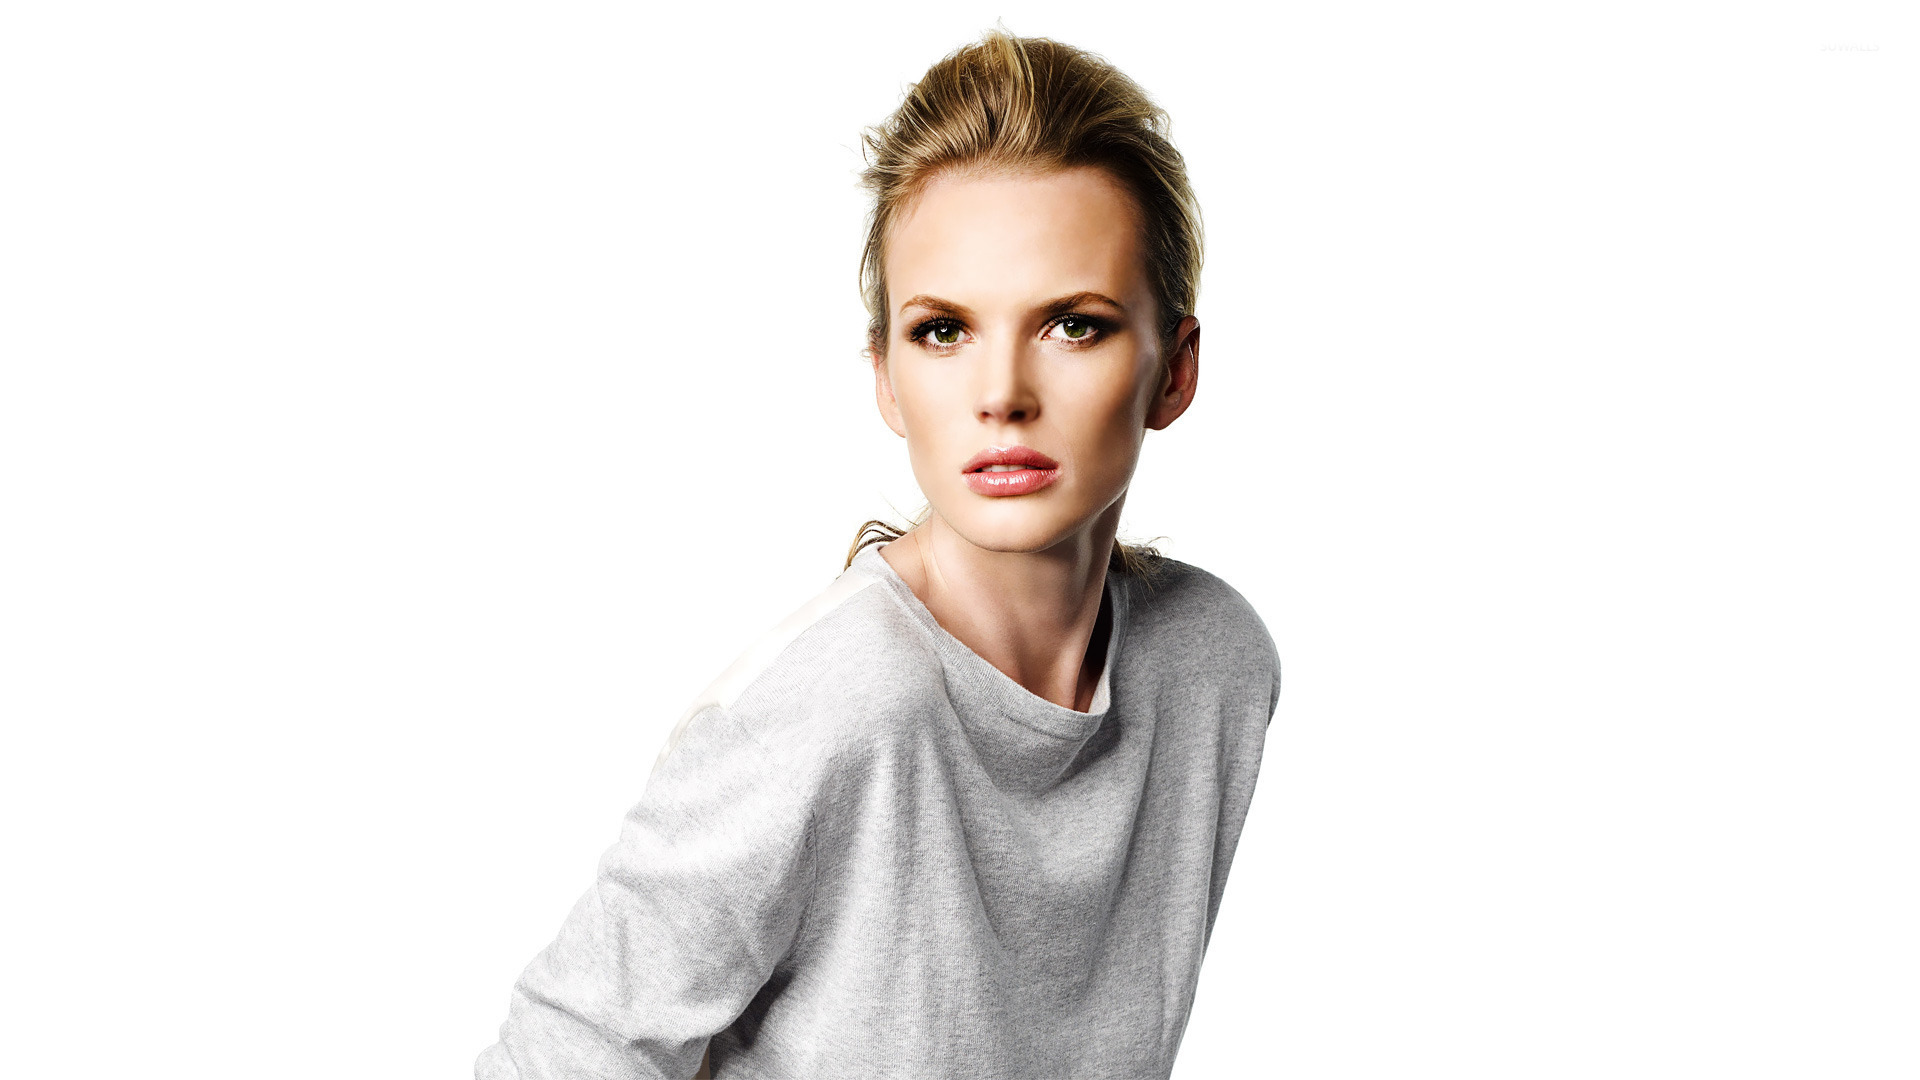 Anne Vyalitsyna Wallpaper Image Photos Pictures Background